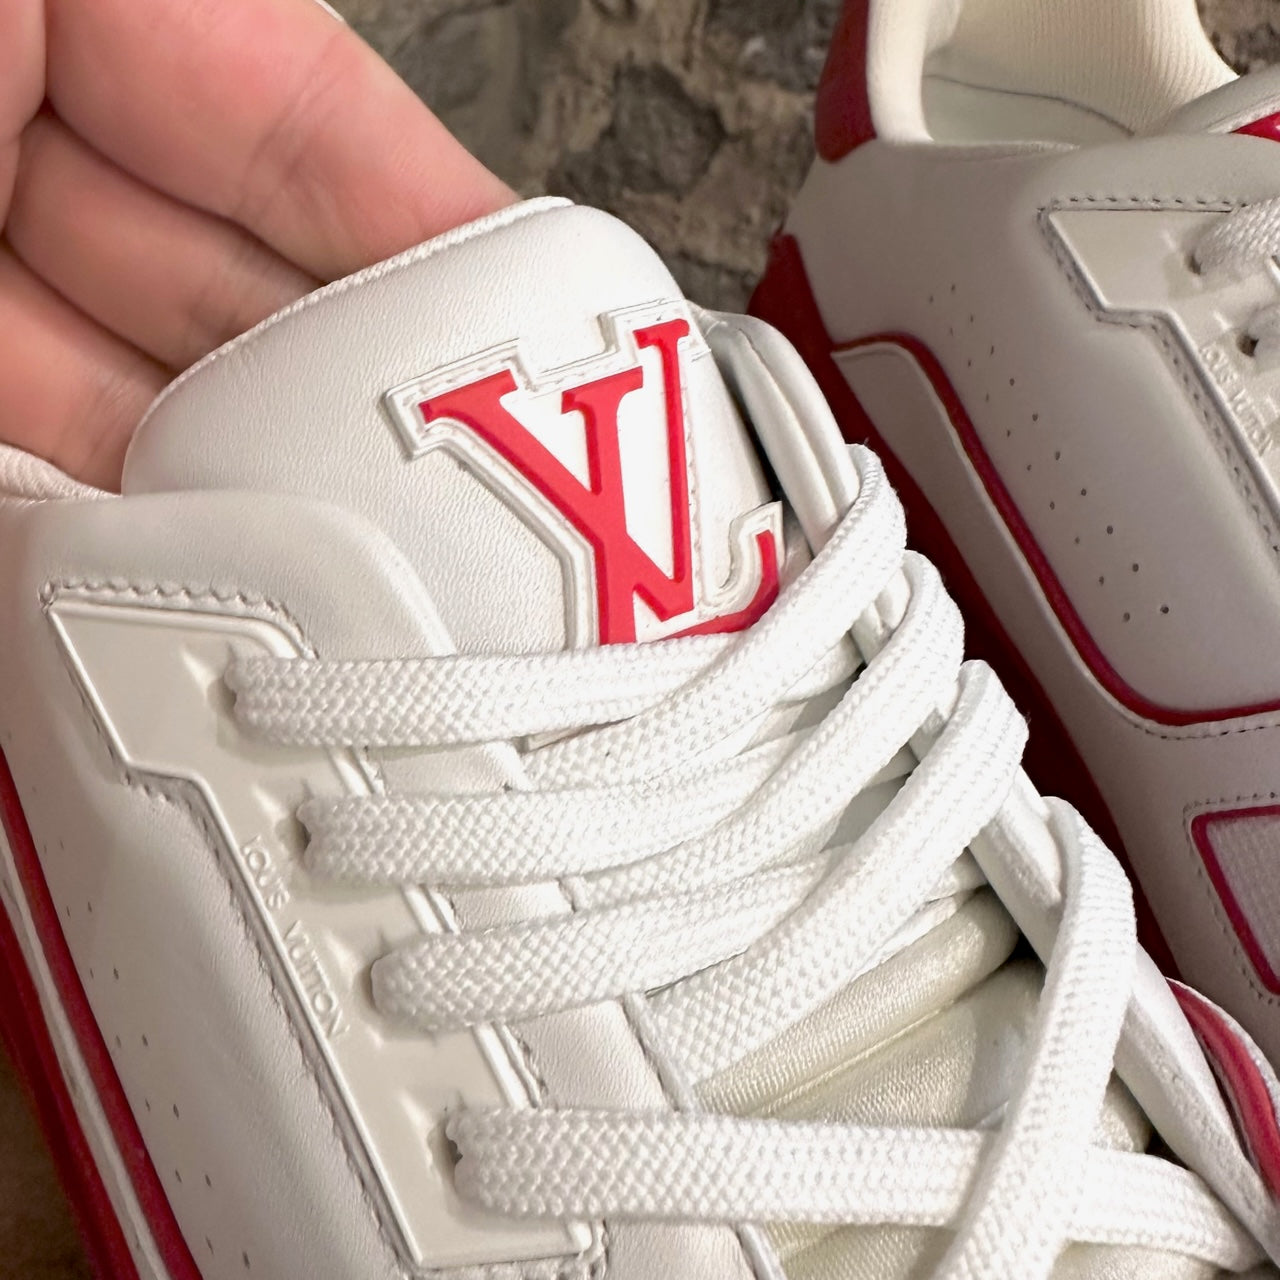 Louis Vuitton Virgil Abloh White Red Signature Low-top Sneakers